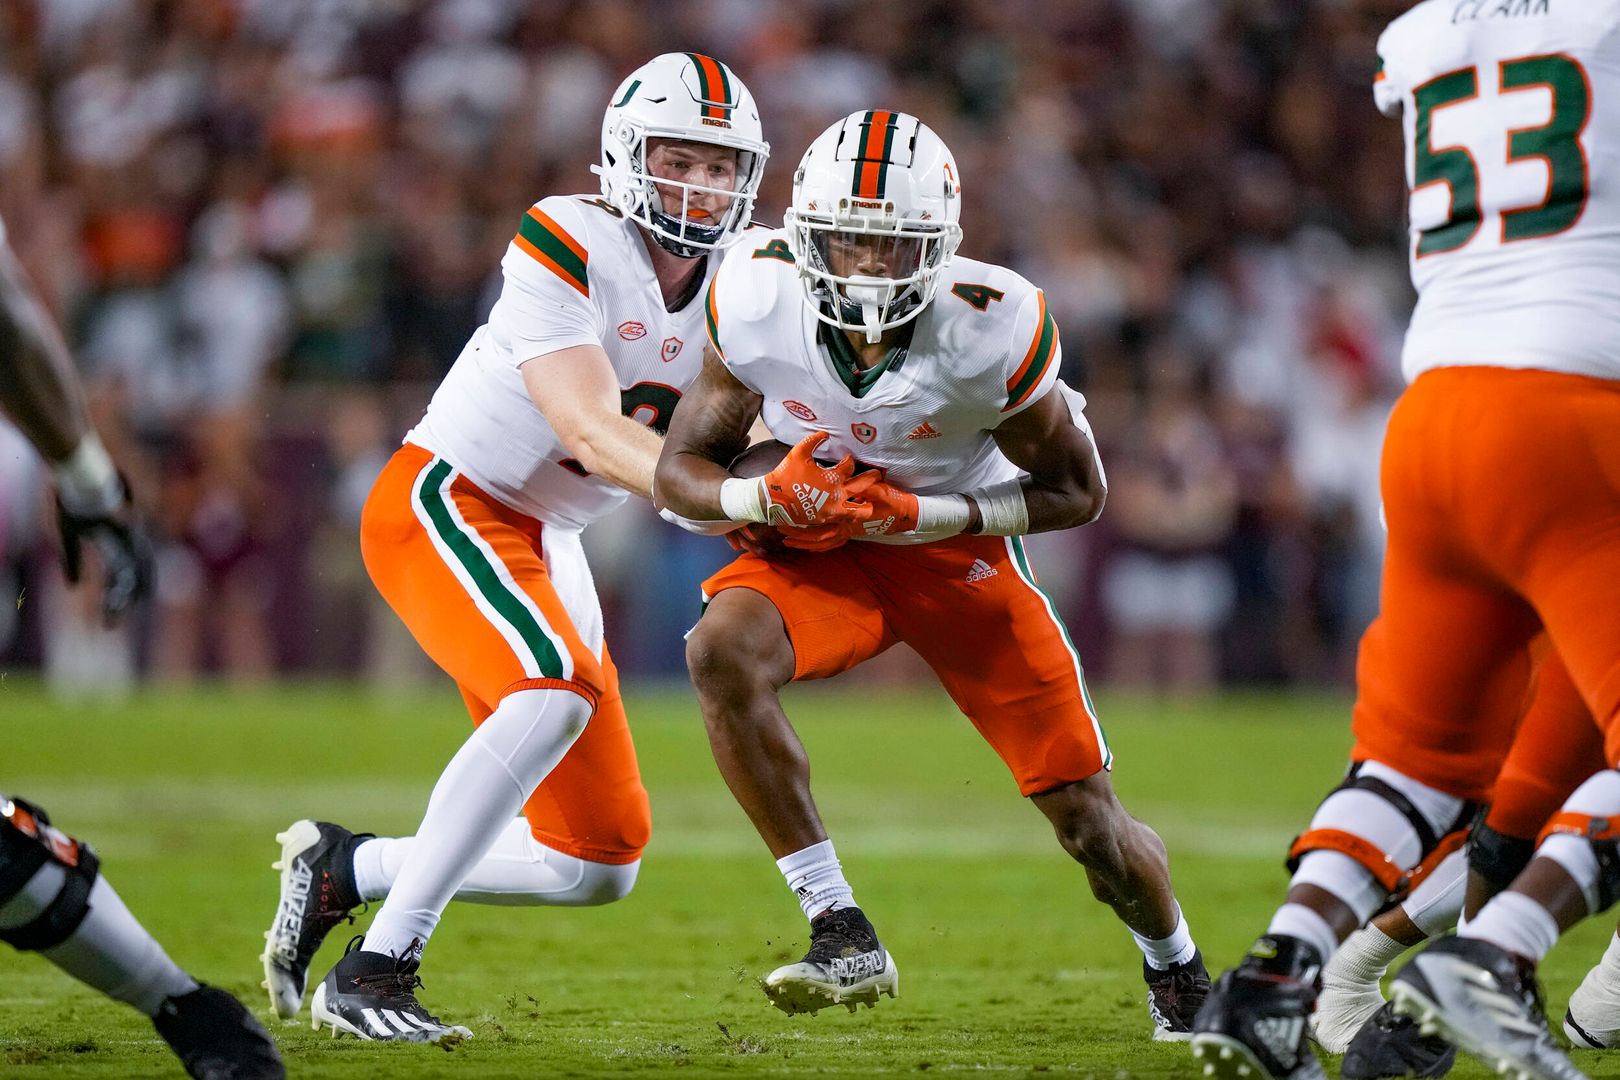 Canes Gear Up for First Road Test